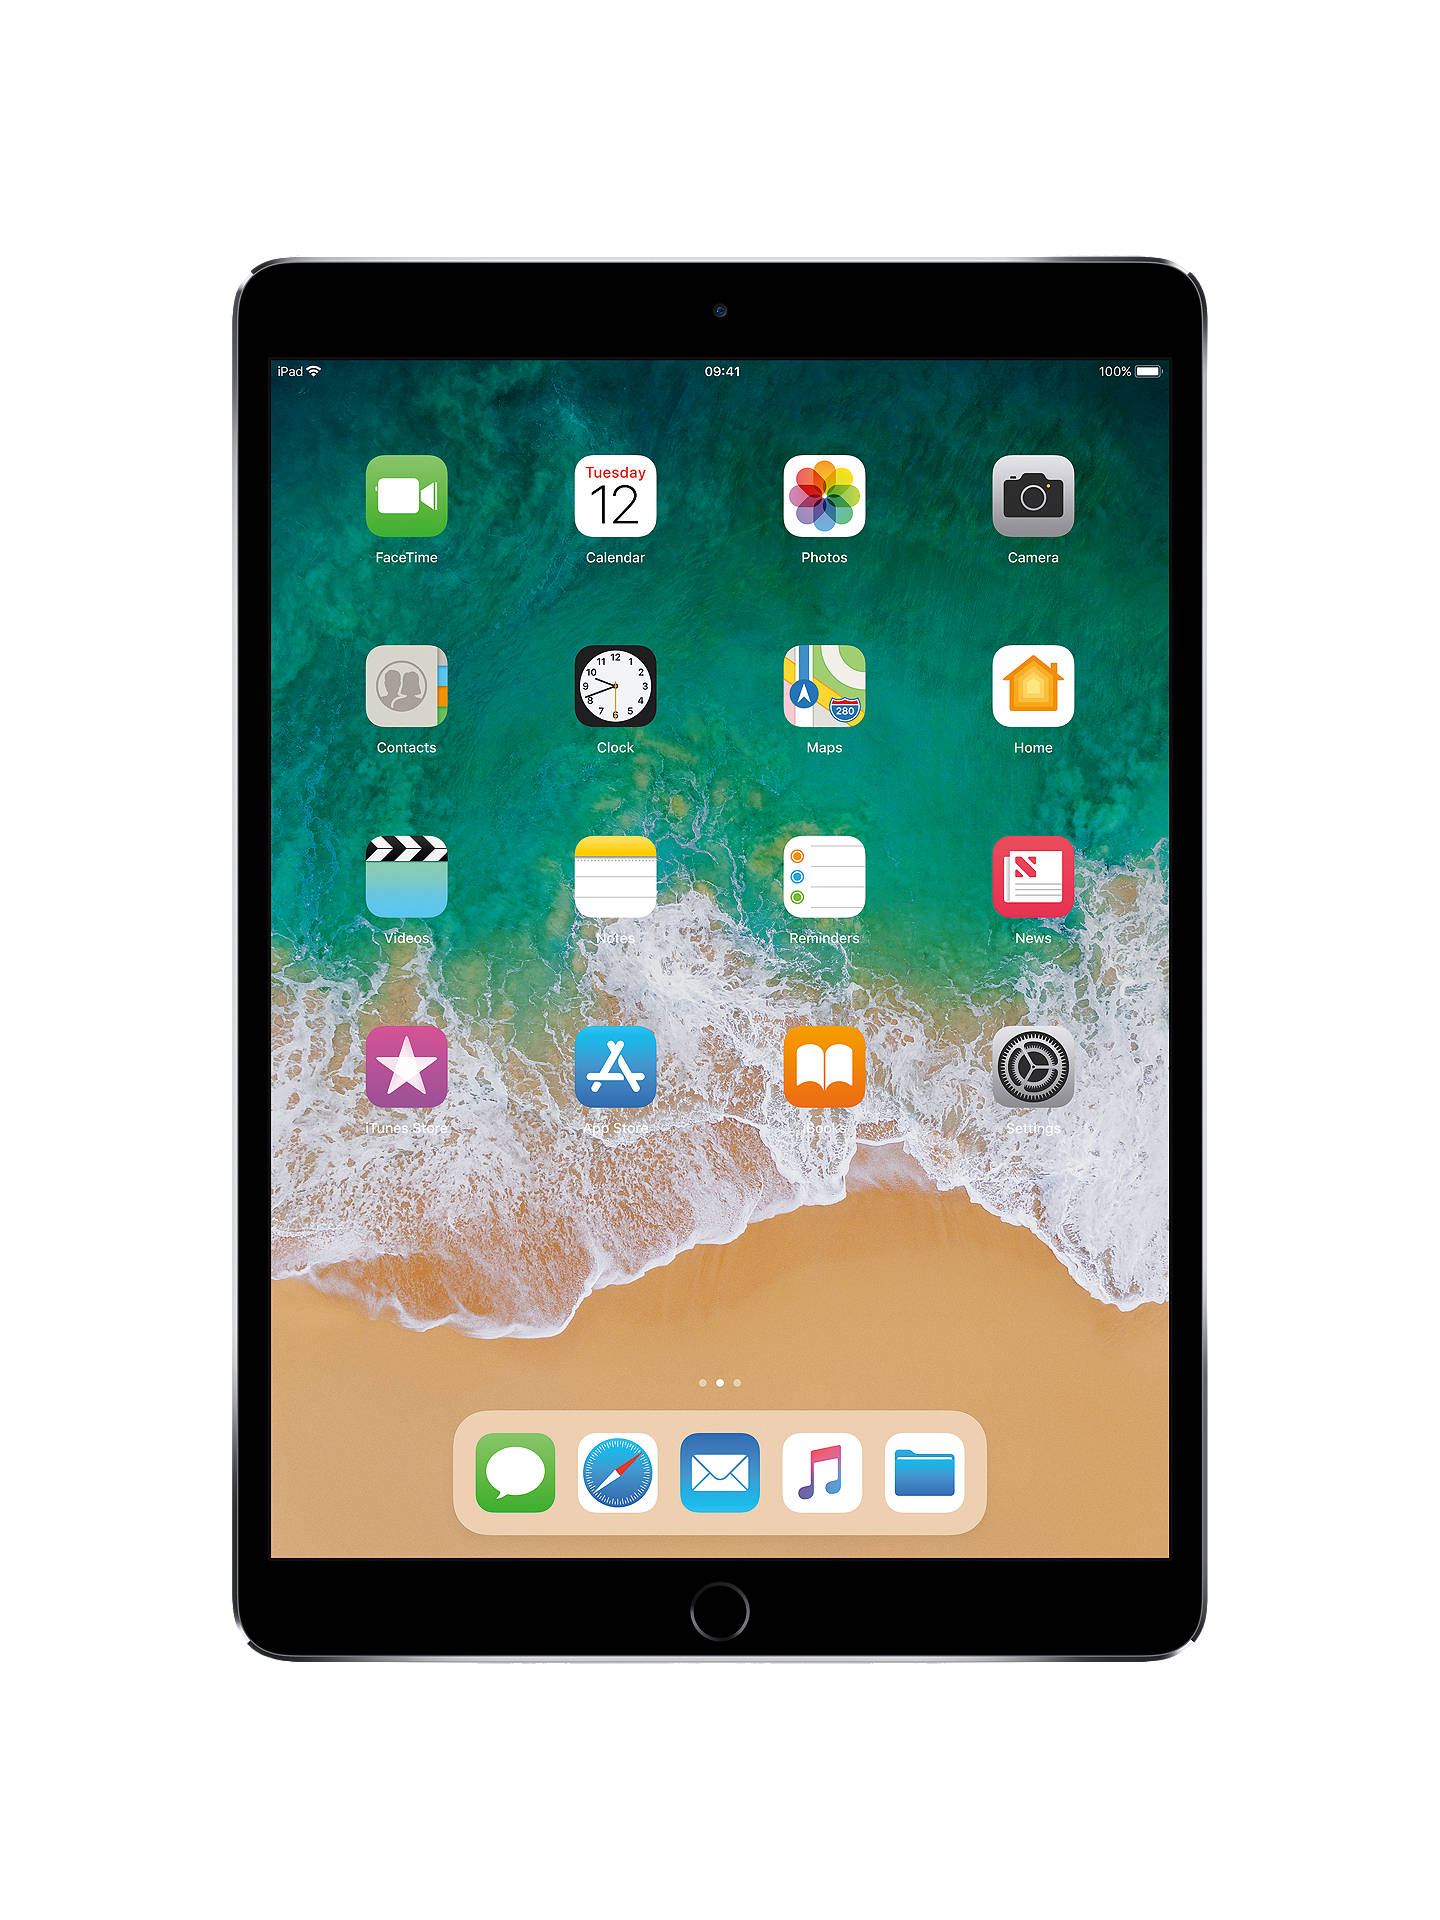 Apple iPad Pro 2018-12.9 Inch-WiFi+Cellular -256GB-Space Grey with